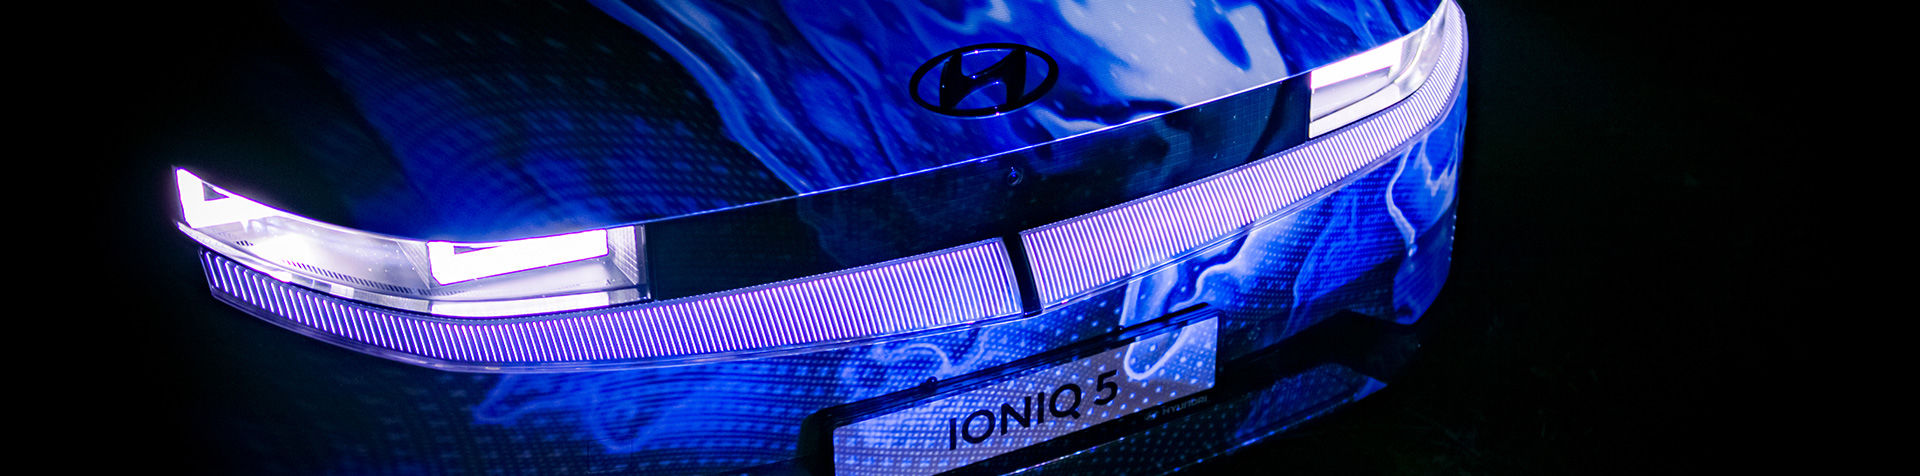 The front of an IONIQ 5 with blue artwork projected onto it.